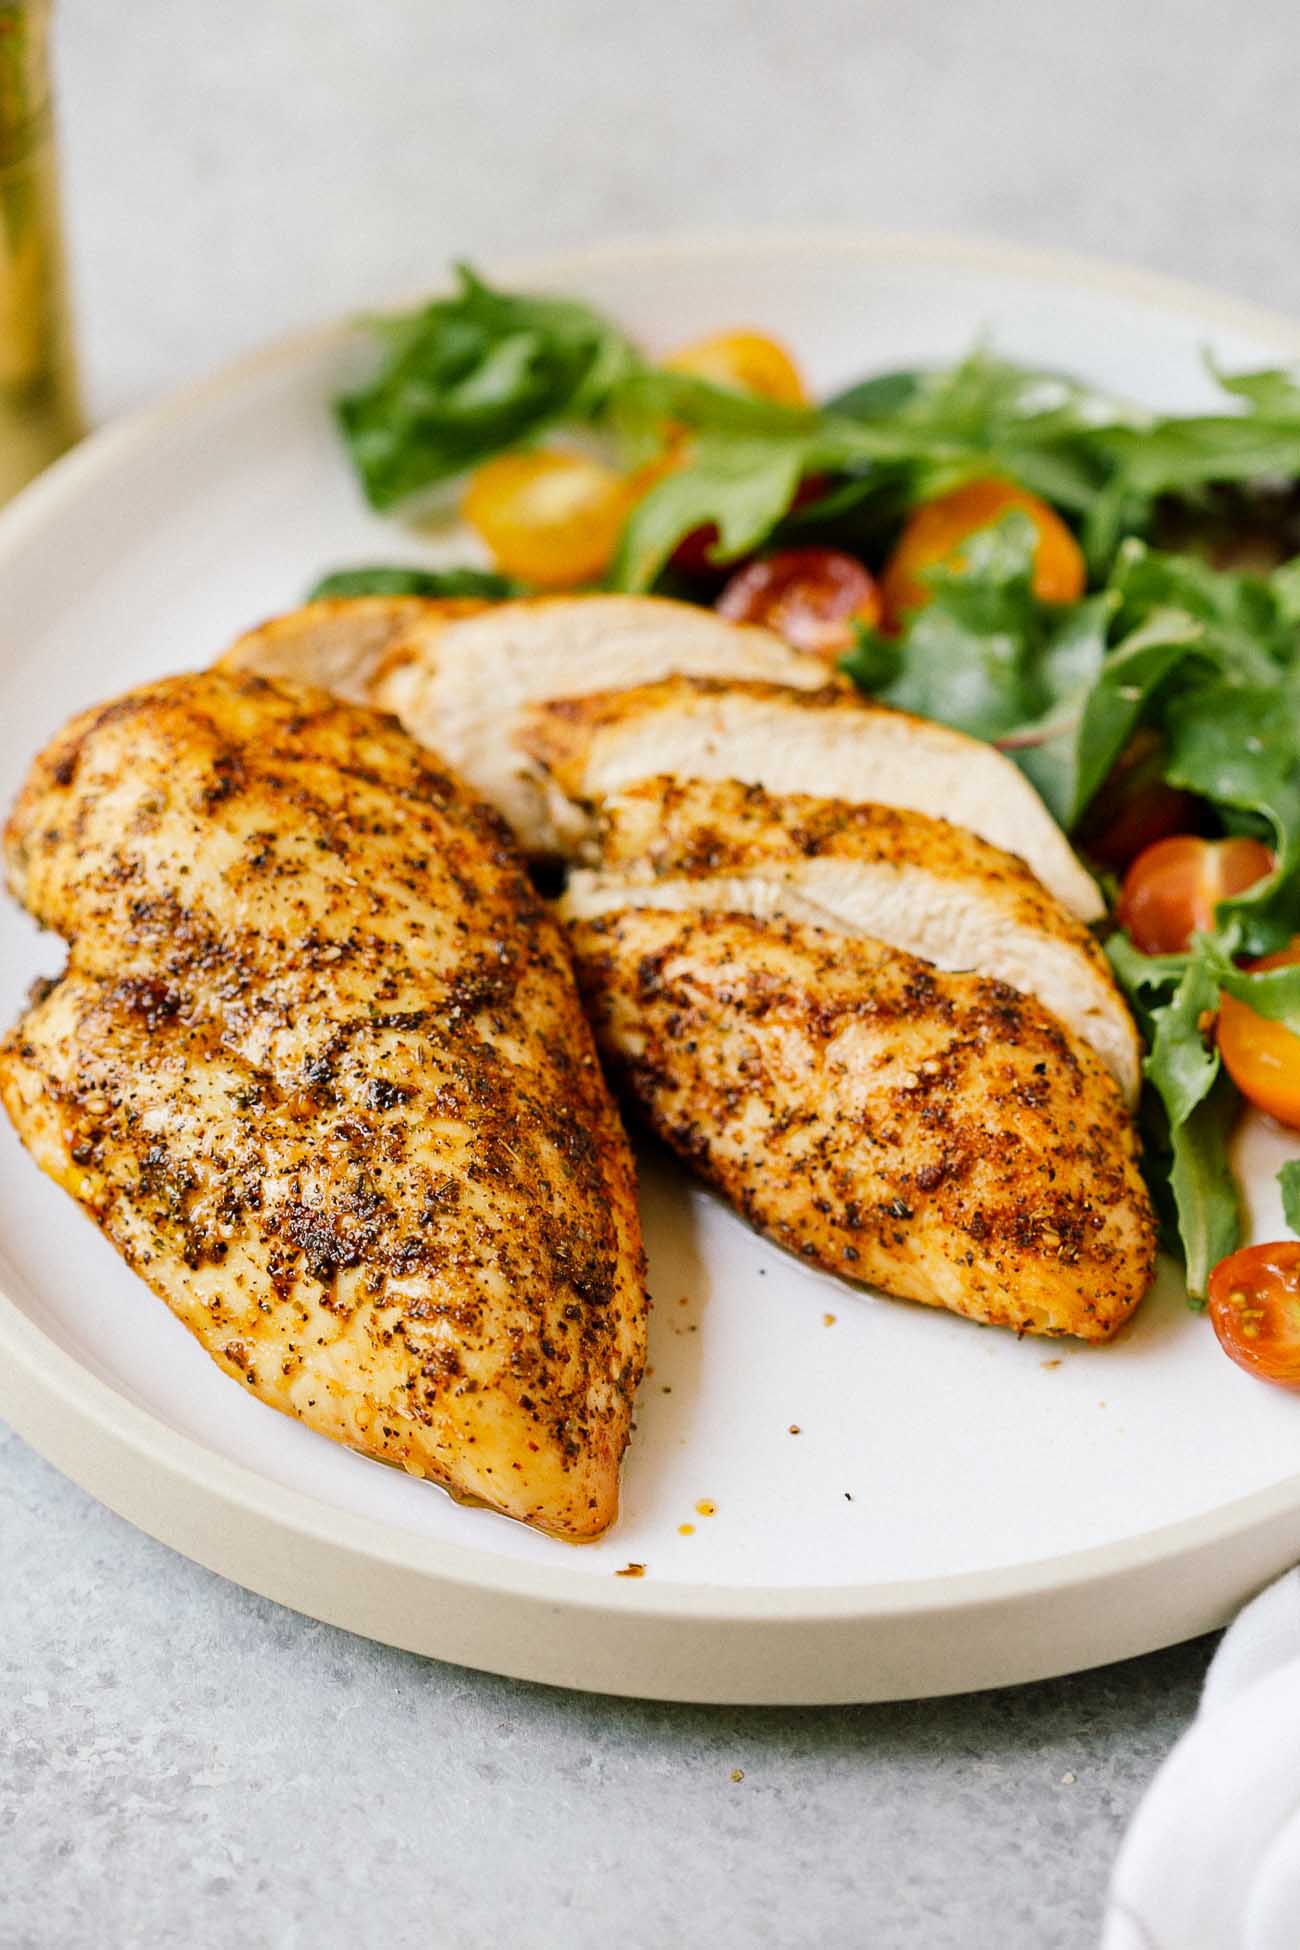 A plate with two air fryer chicken breasts.